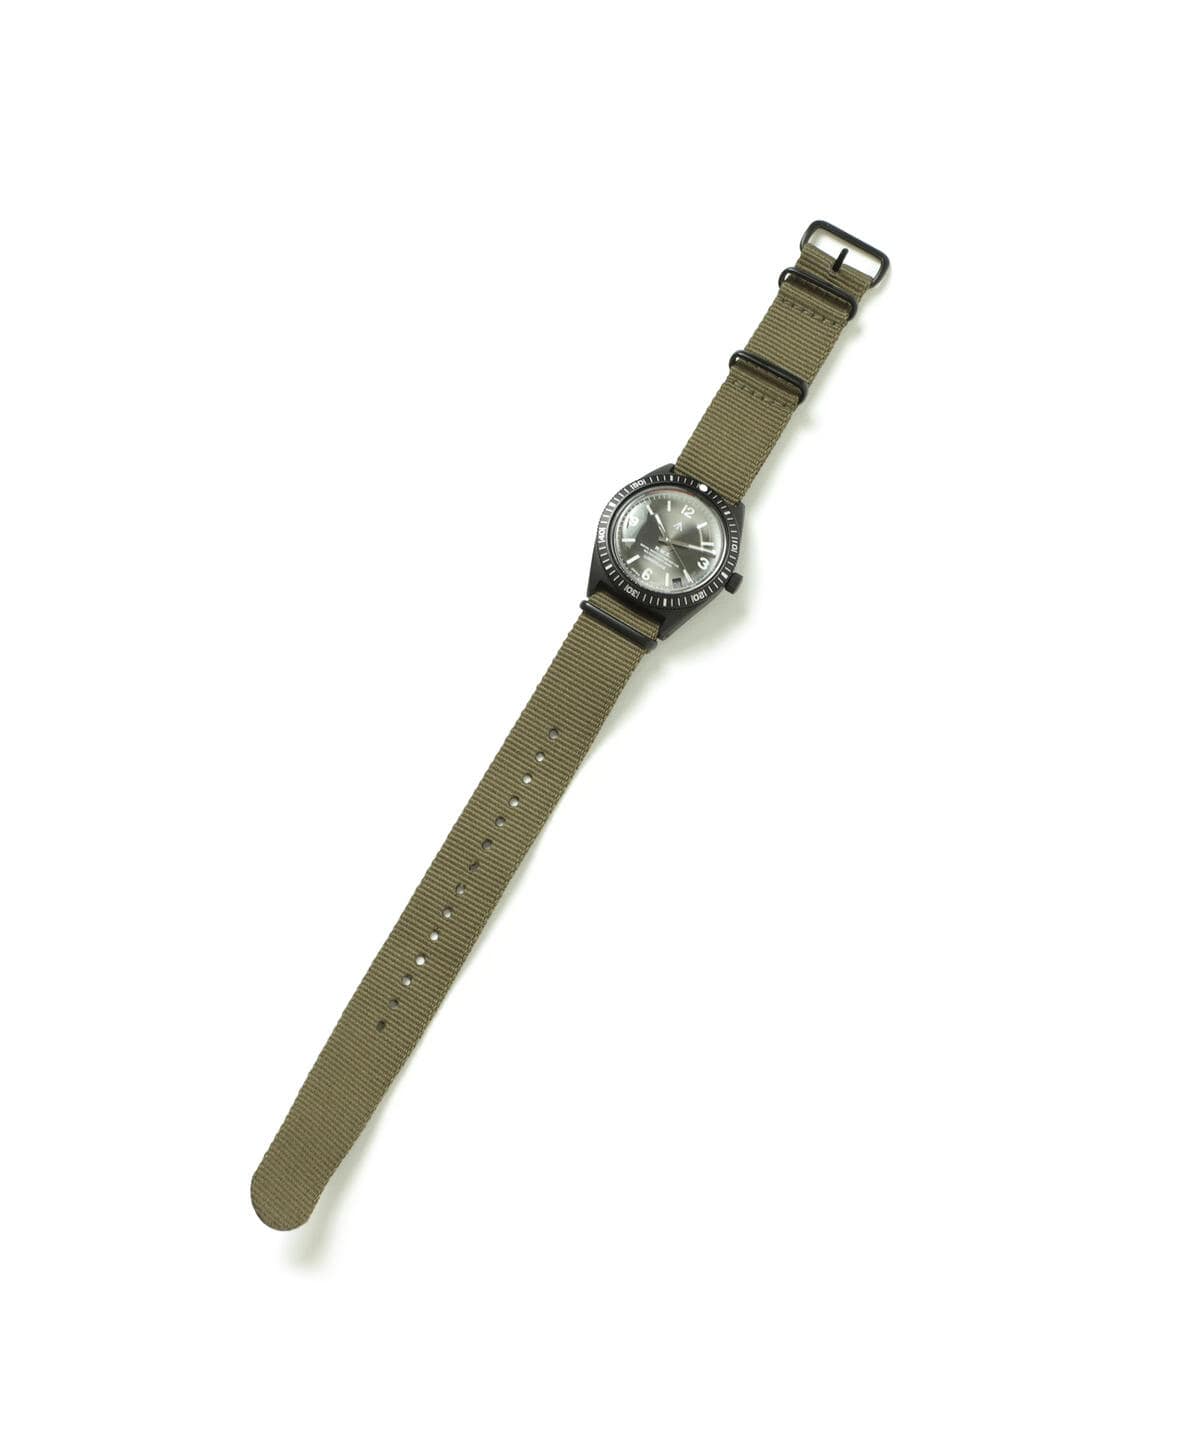 B:MING by BEAMS（ビーミング by ビームス）NAVAL WATCH Produced by ...